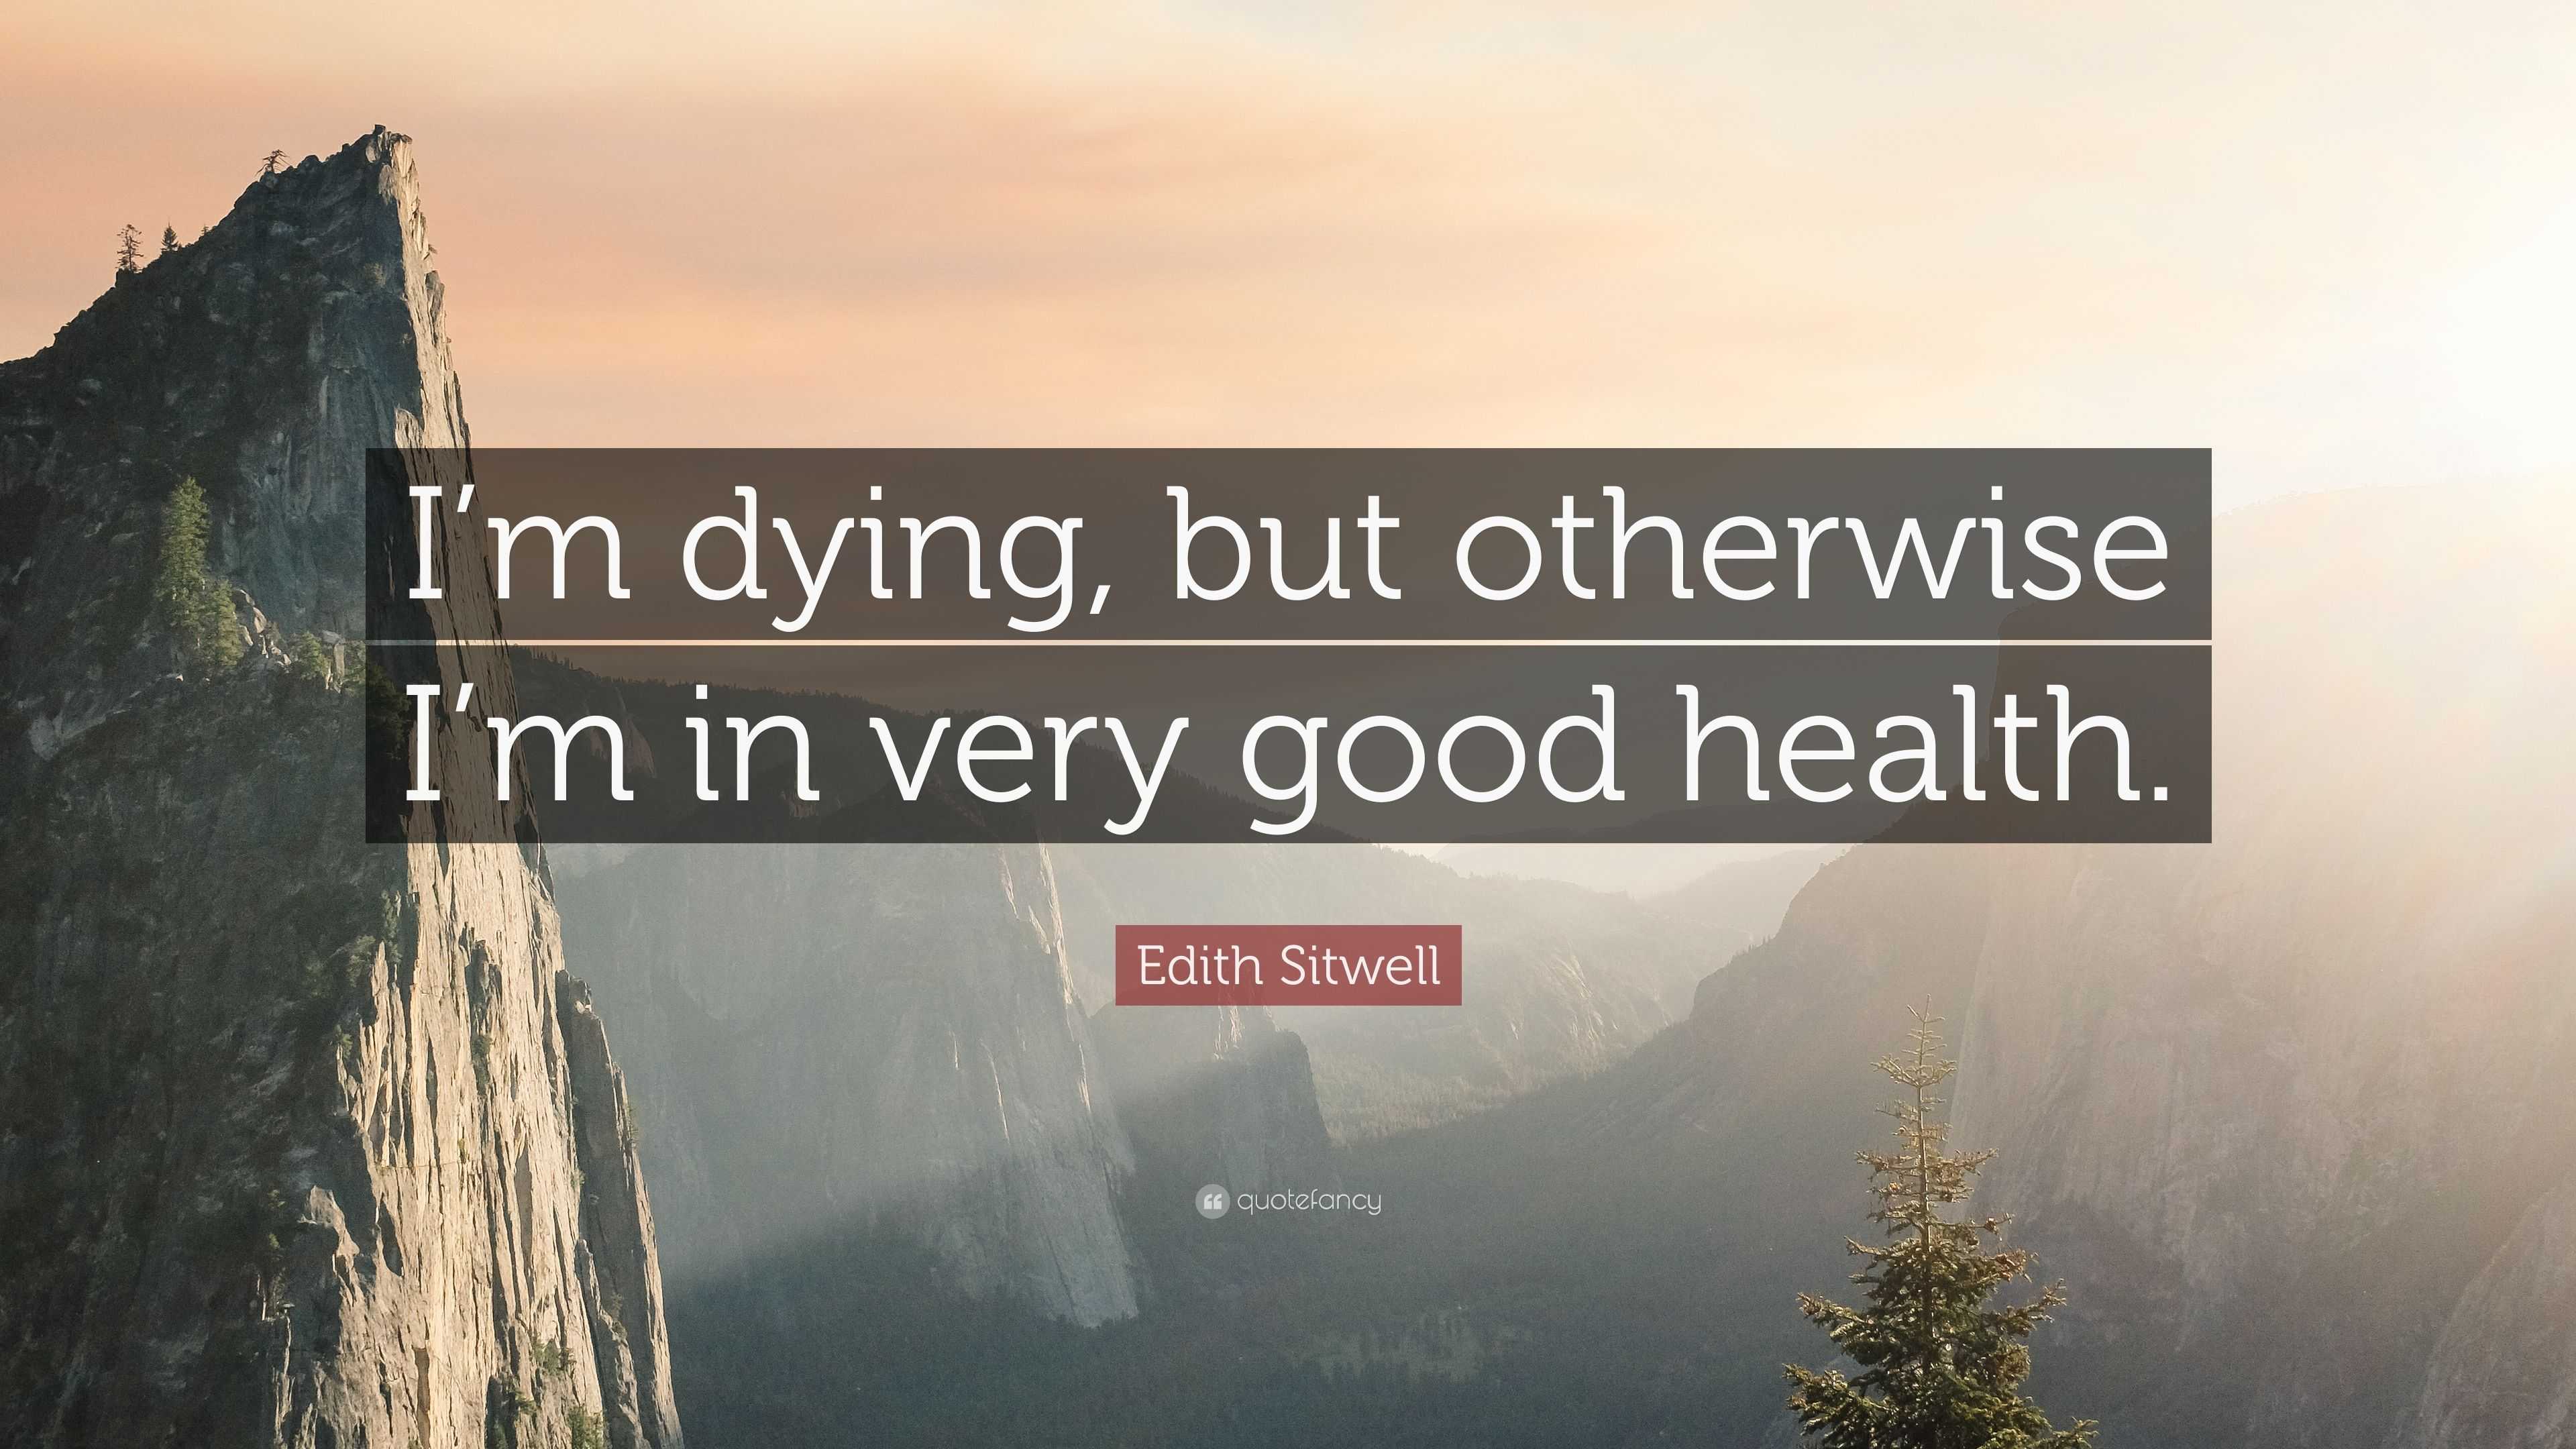 Edith Sitwell Quote: “I’m dying, but otherwise I’m in very good health